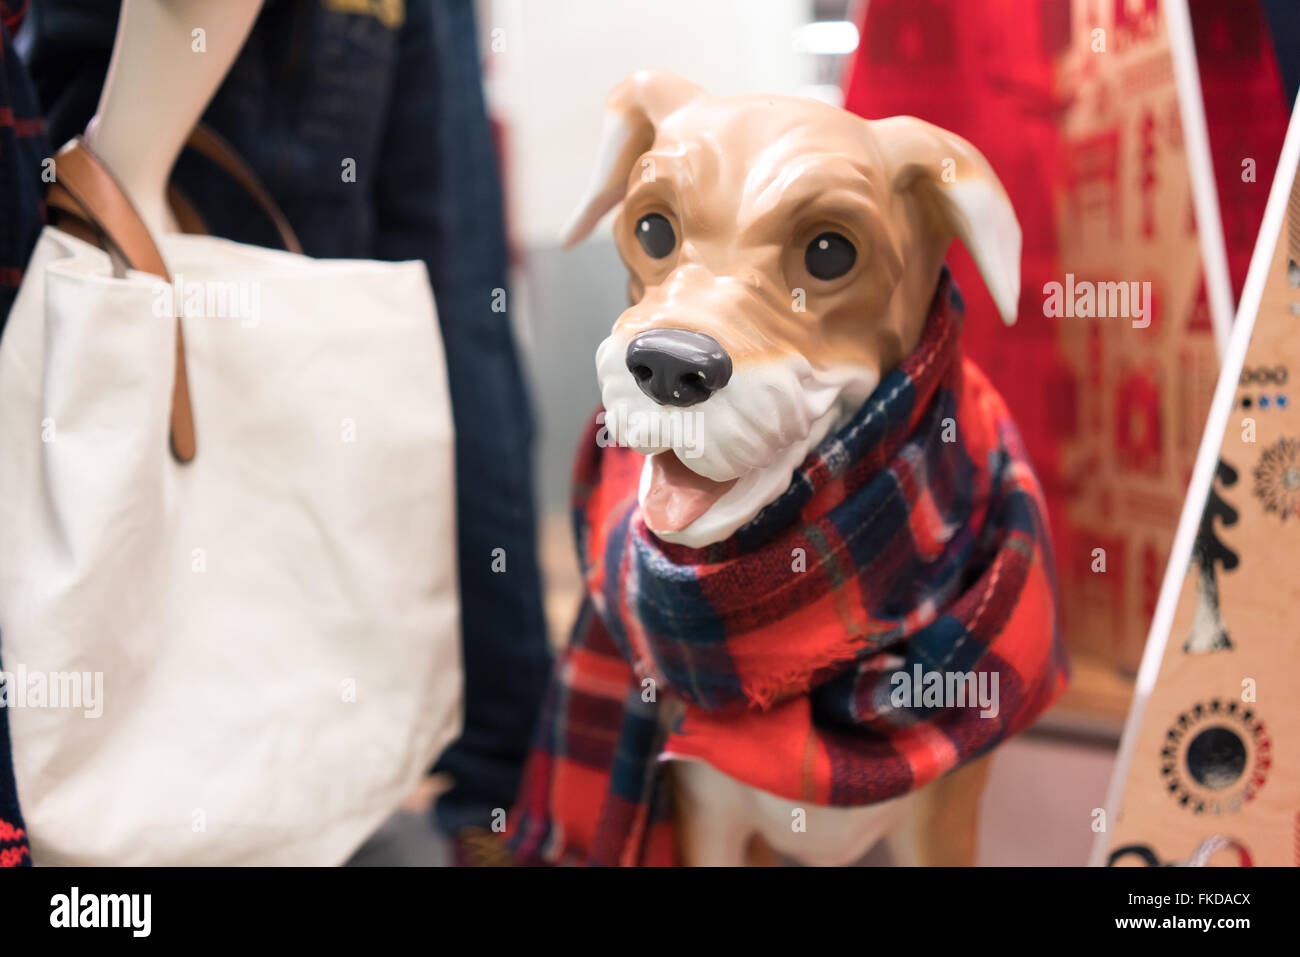 Mannequin of dog displaying dog clothing and scarf in clothing store Stock Photo